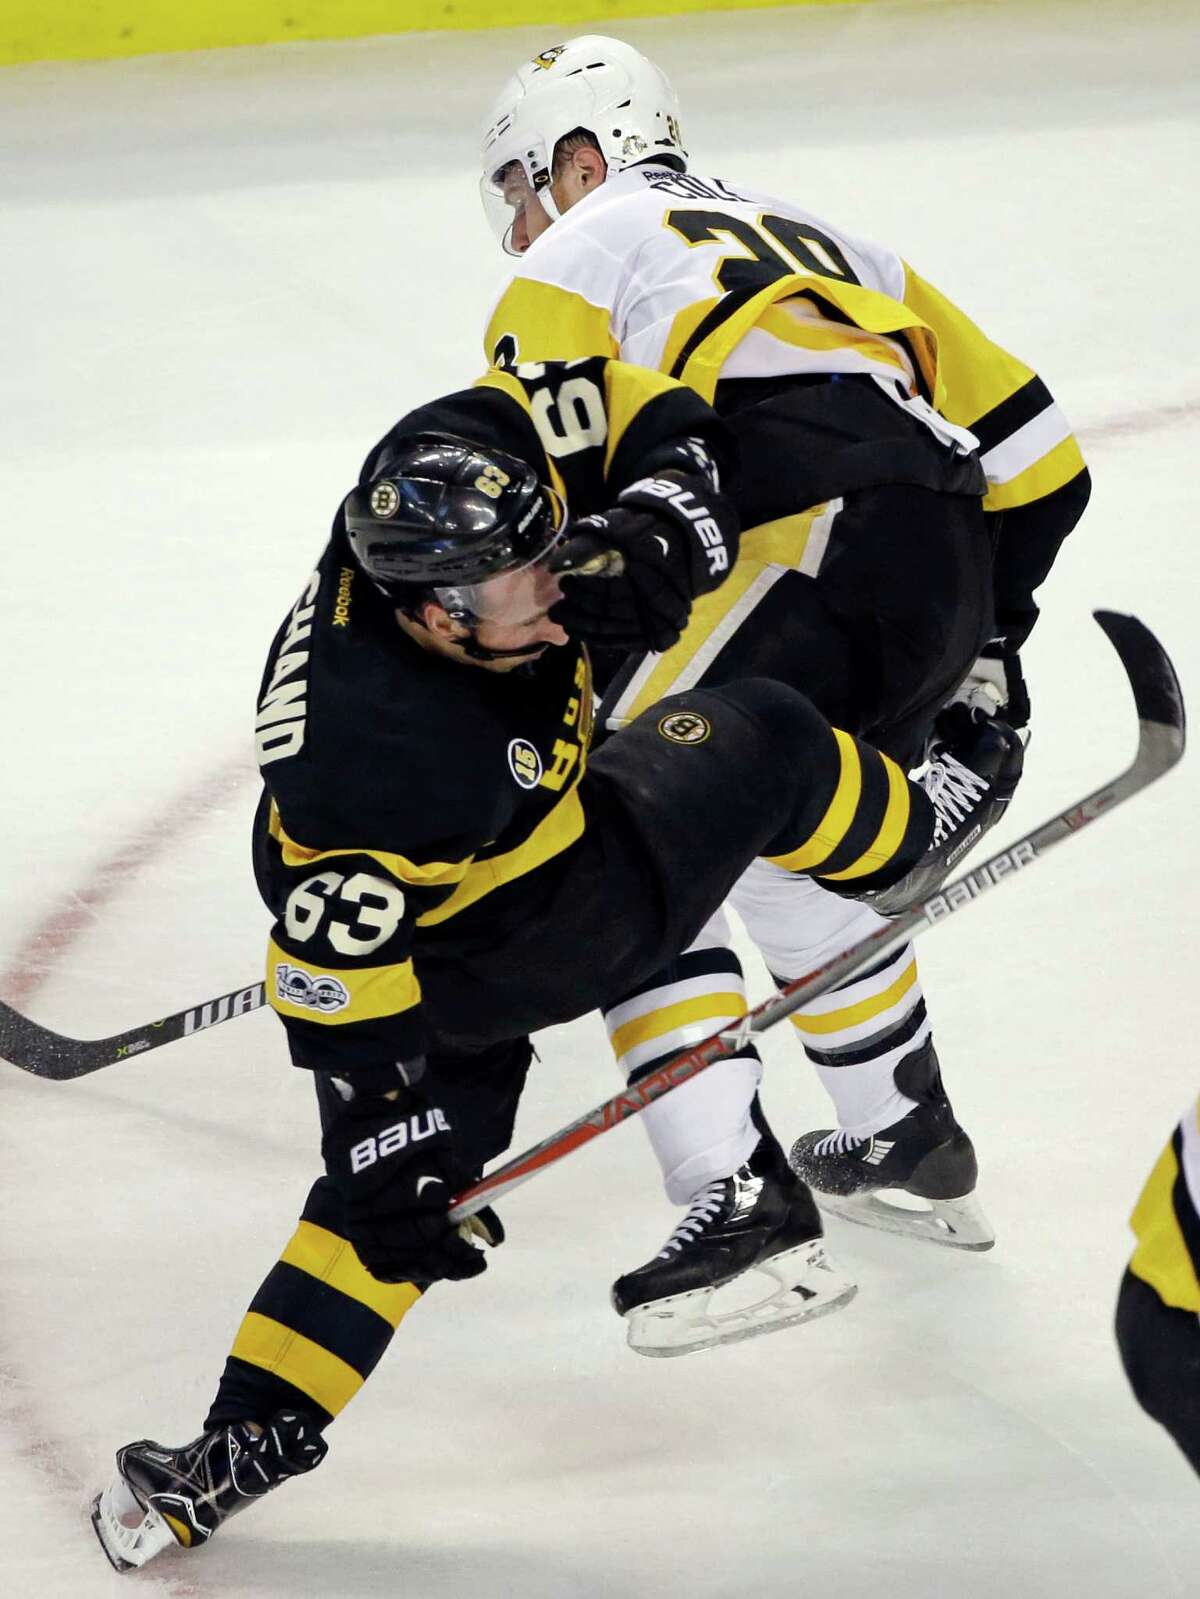 Pittsburgh Penguins defenseman Ian Cole (28) collides with Boston Bruins left wing Brad Marchand (63) during the first period of an NHL hockey game, Thursday, Jan. 26, 2017, in Boston. (AP Photo/Elise Amendola) ORG XMIT: MAEA103